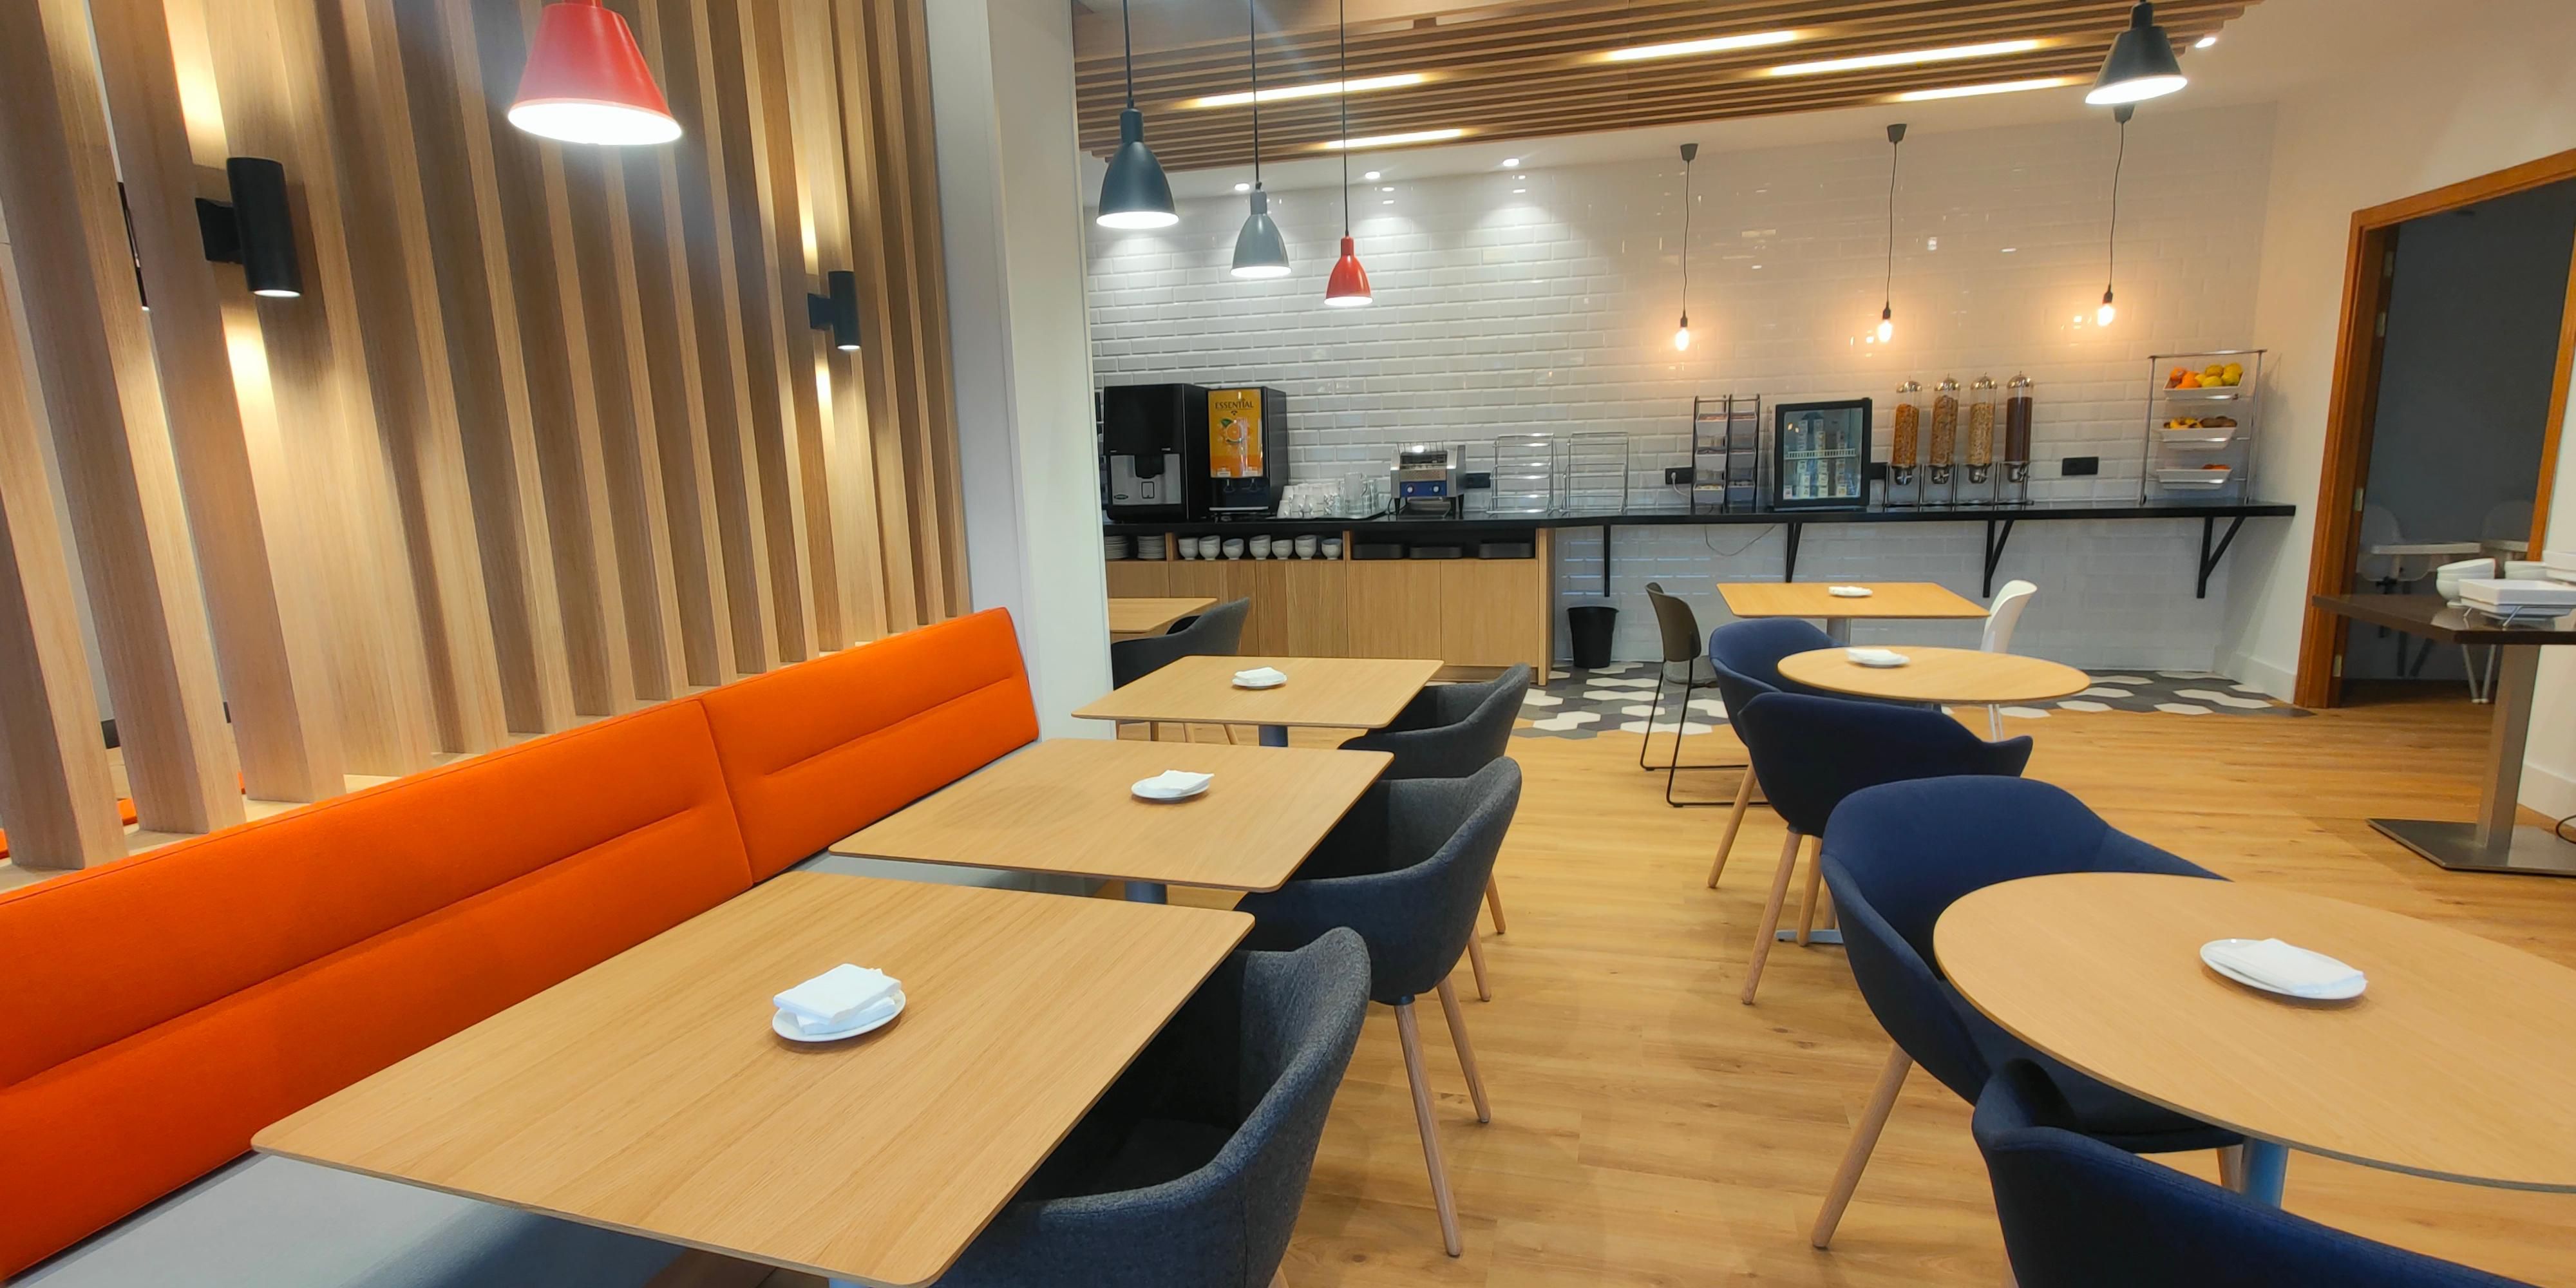 Come and check out our newly refurbished ground floor with the latest Holiday Inn Express look and quality features. 
This includes the lobby, reception, bar, breakfast area and meeting rooms. We have also created cool working spaces.